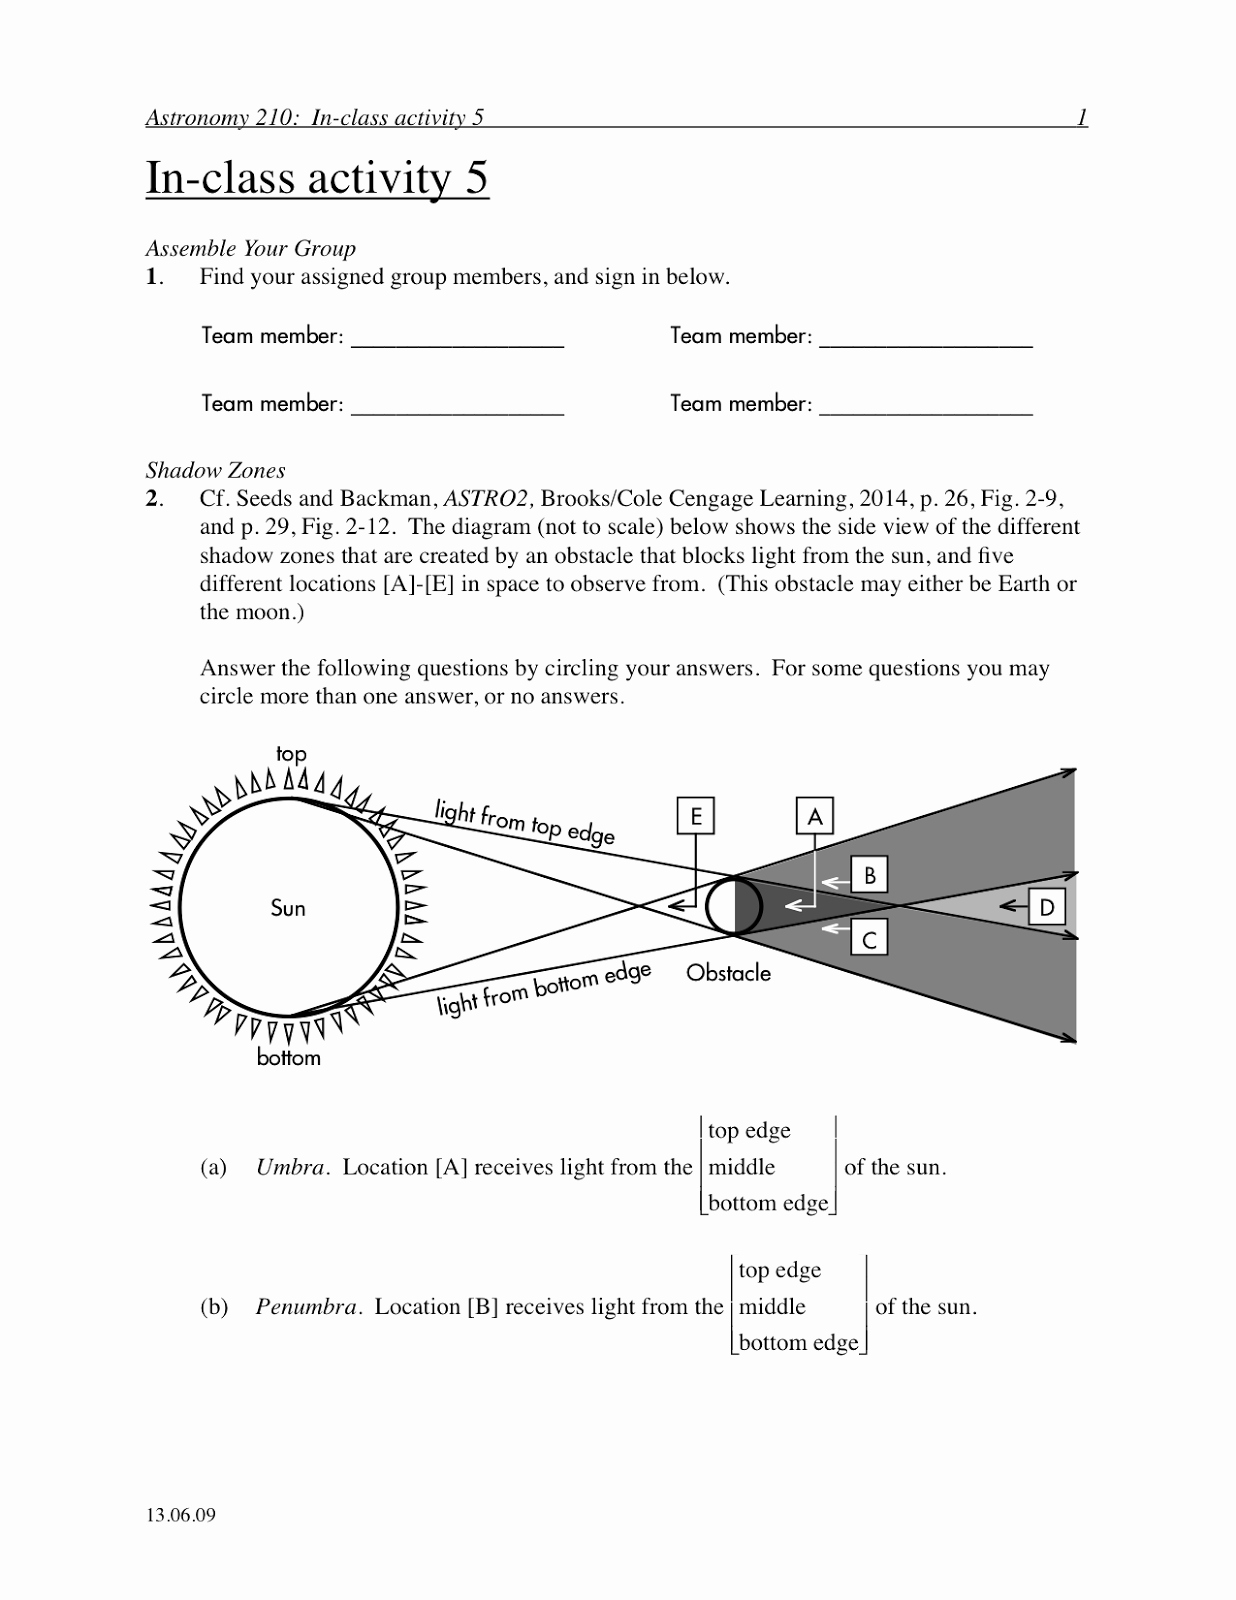 Solar and Lunar Eclipses Worksheet Elegant P Dog S Blog Boring but Important astronomy In Class